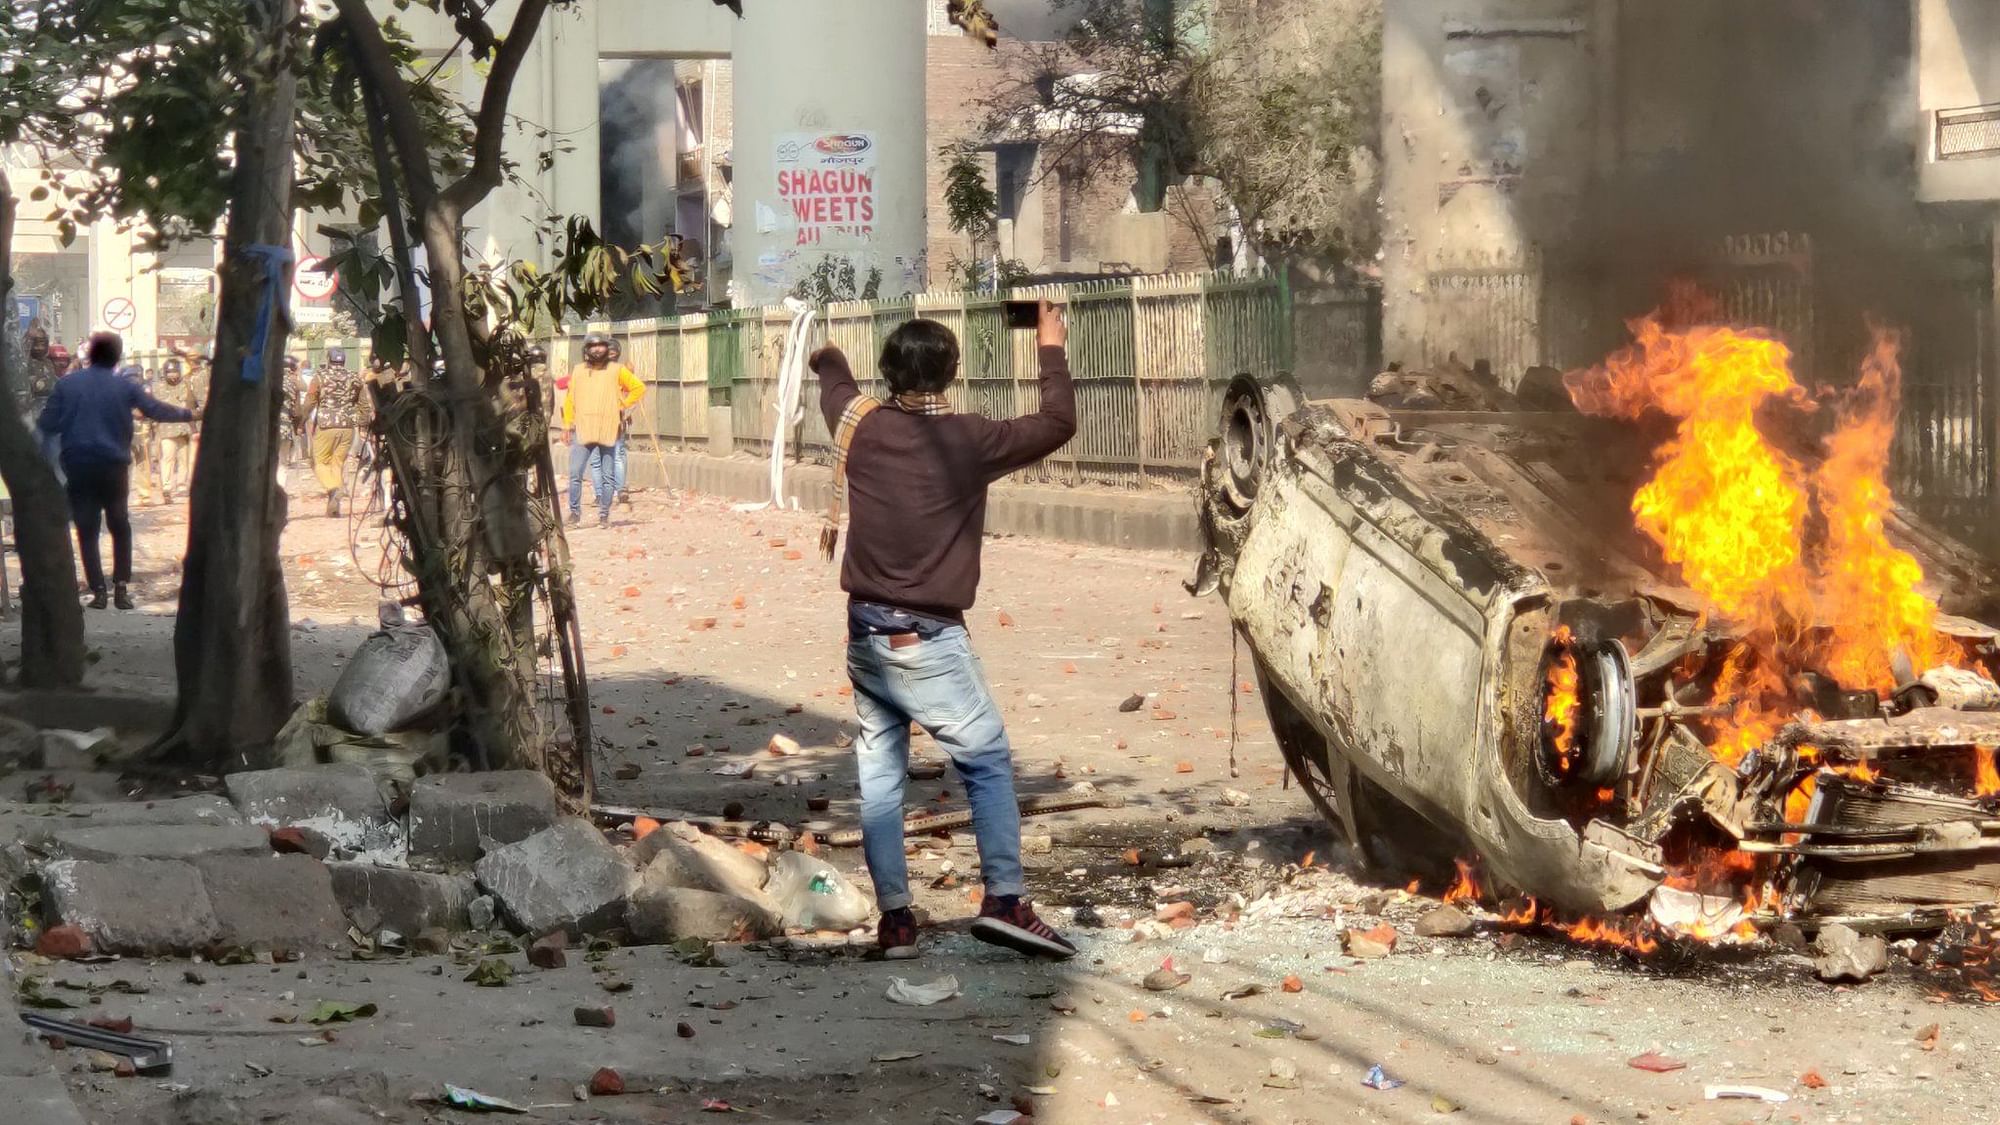 Maujpur-Jaffrabad was among the worst-hit areas by the violence in Delhi.